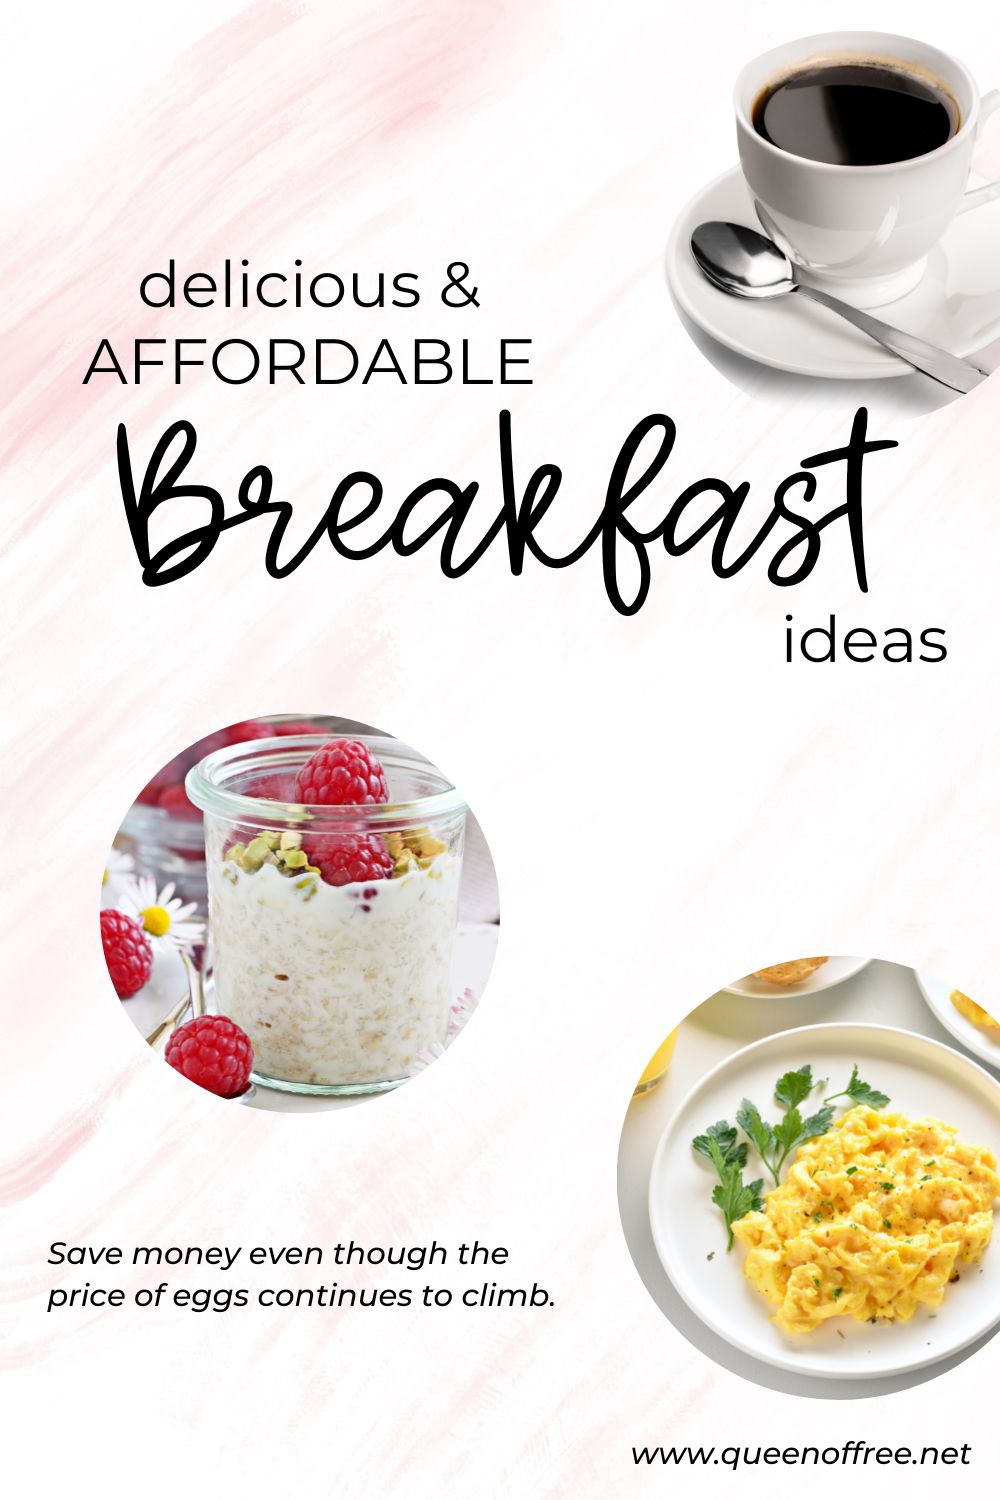 Even with the price of eggs on the rise, an affordable breakfast can still be delicious and easy! Check out these tips today. 